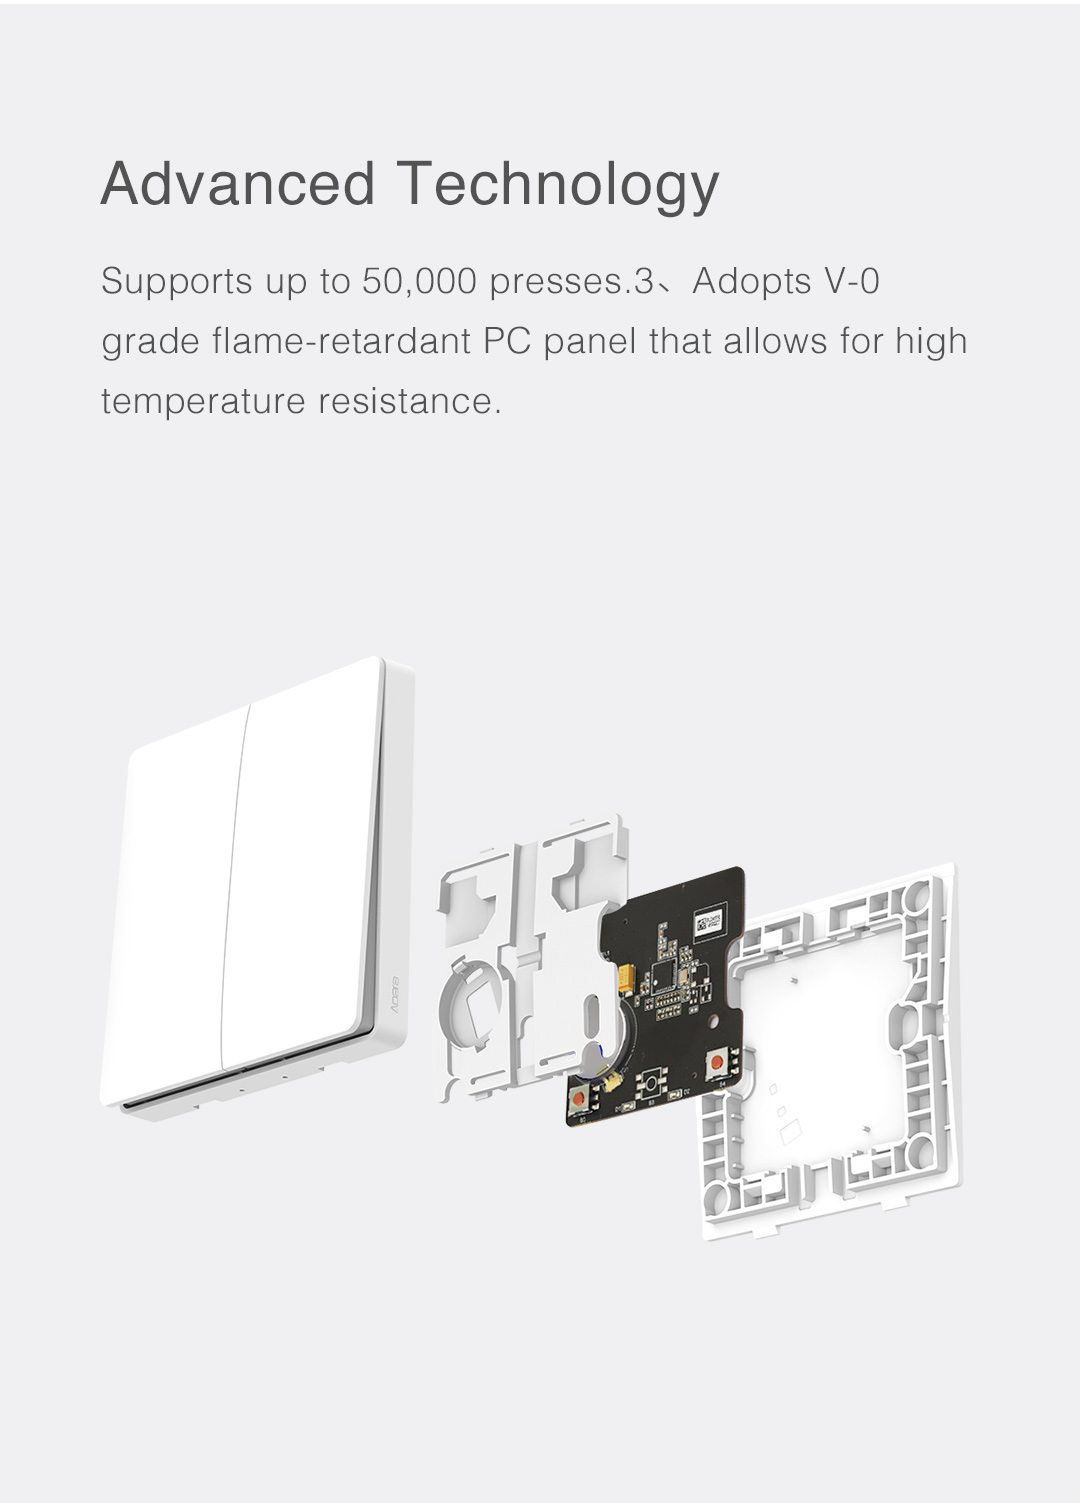 Aqara wireless light switch supports up to 50,000 presses and allows for high temperature resistance